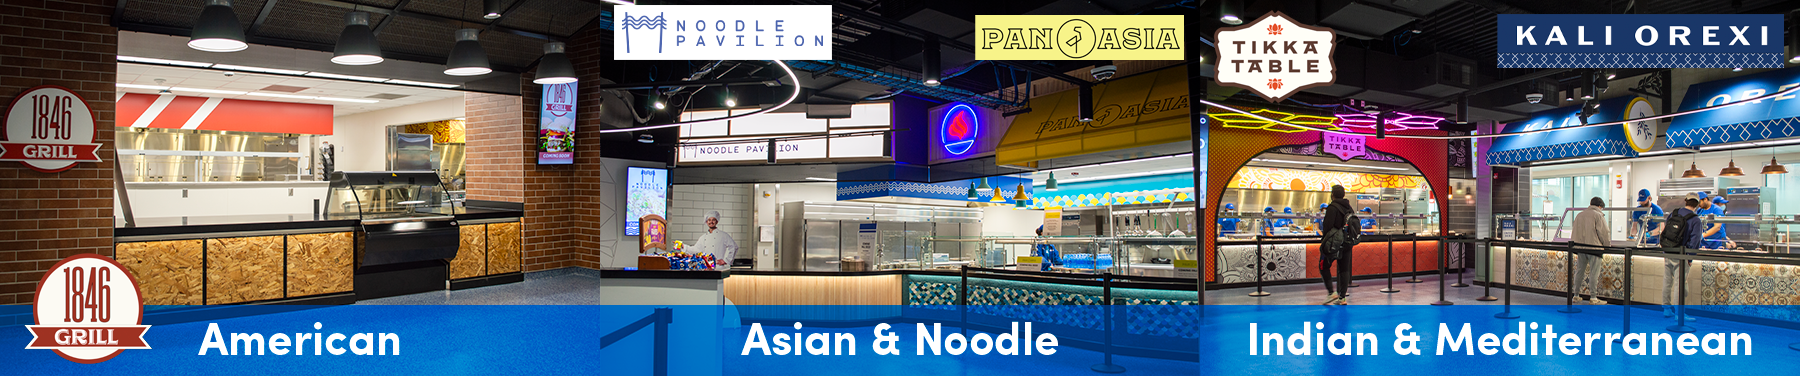 American (1846 Grill), Asian (Pan Asia) & Noodle (The Noodle Pavilion), and Indian (Tikka Table) & Mediterranean (Kali Orexi) stations